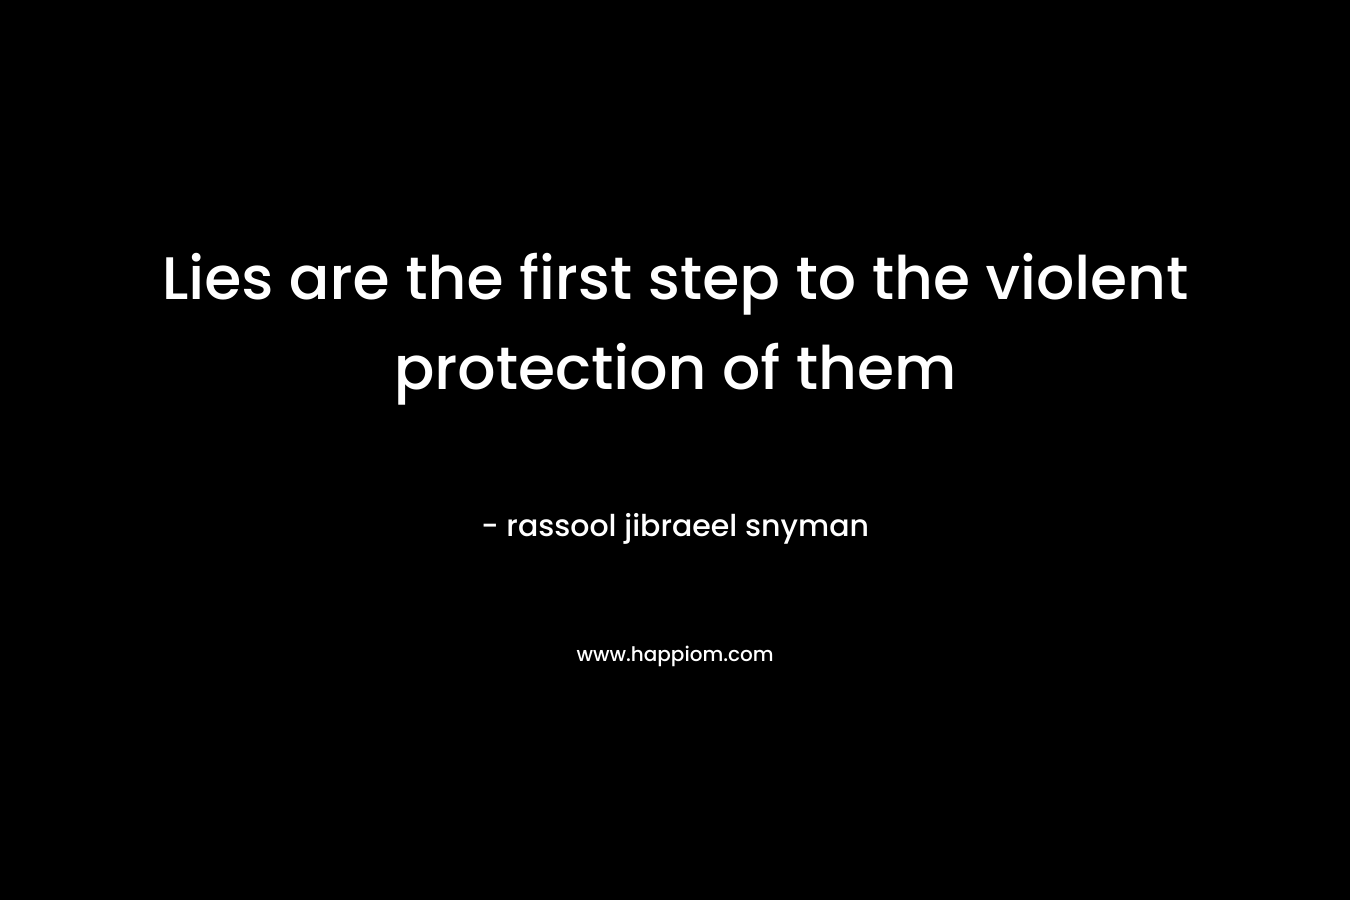 Lies are the first step to the violent protection of them